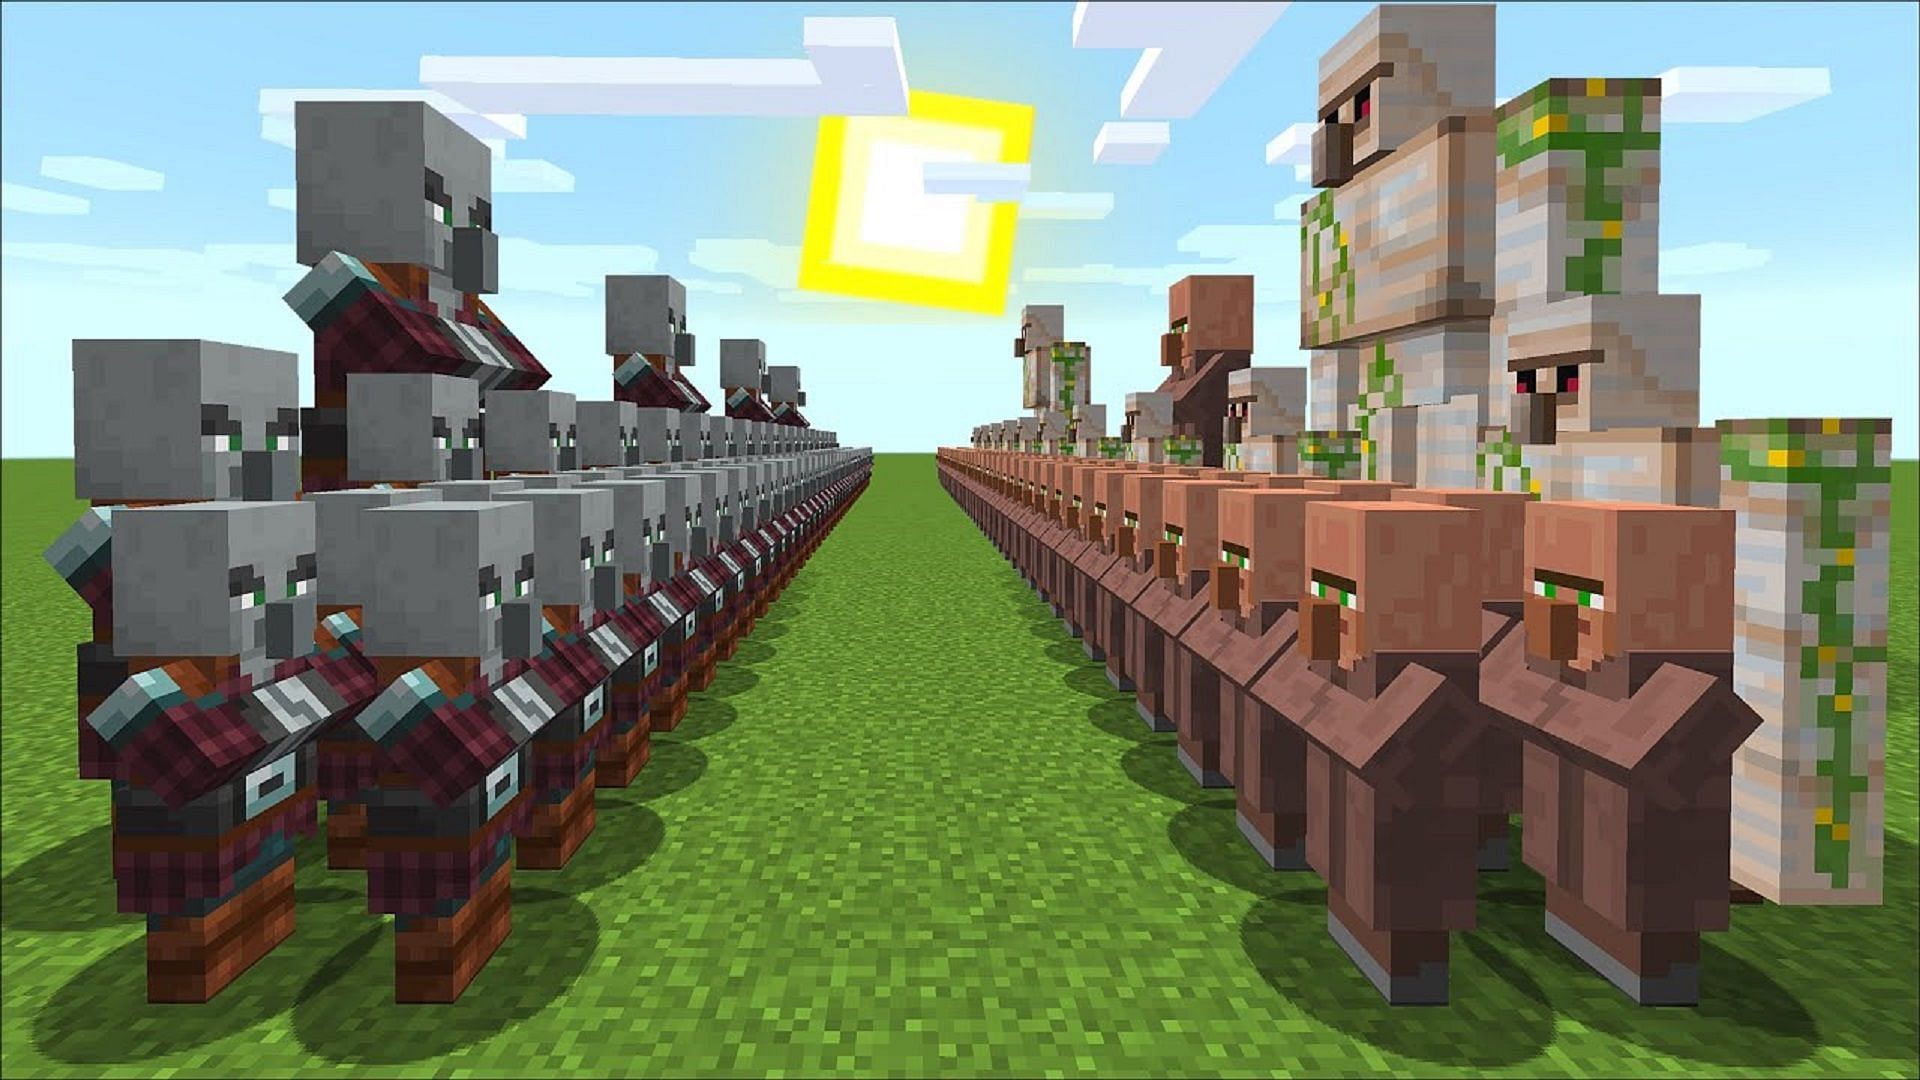 Pillagers facing off against villagers in Minecraft (Image via MC Naveed)